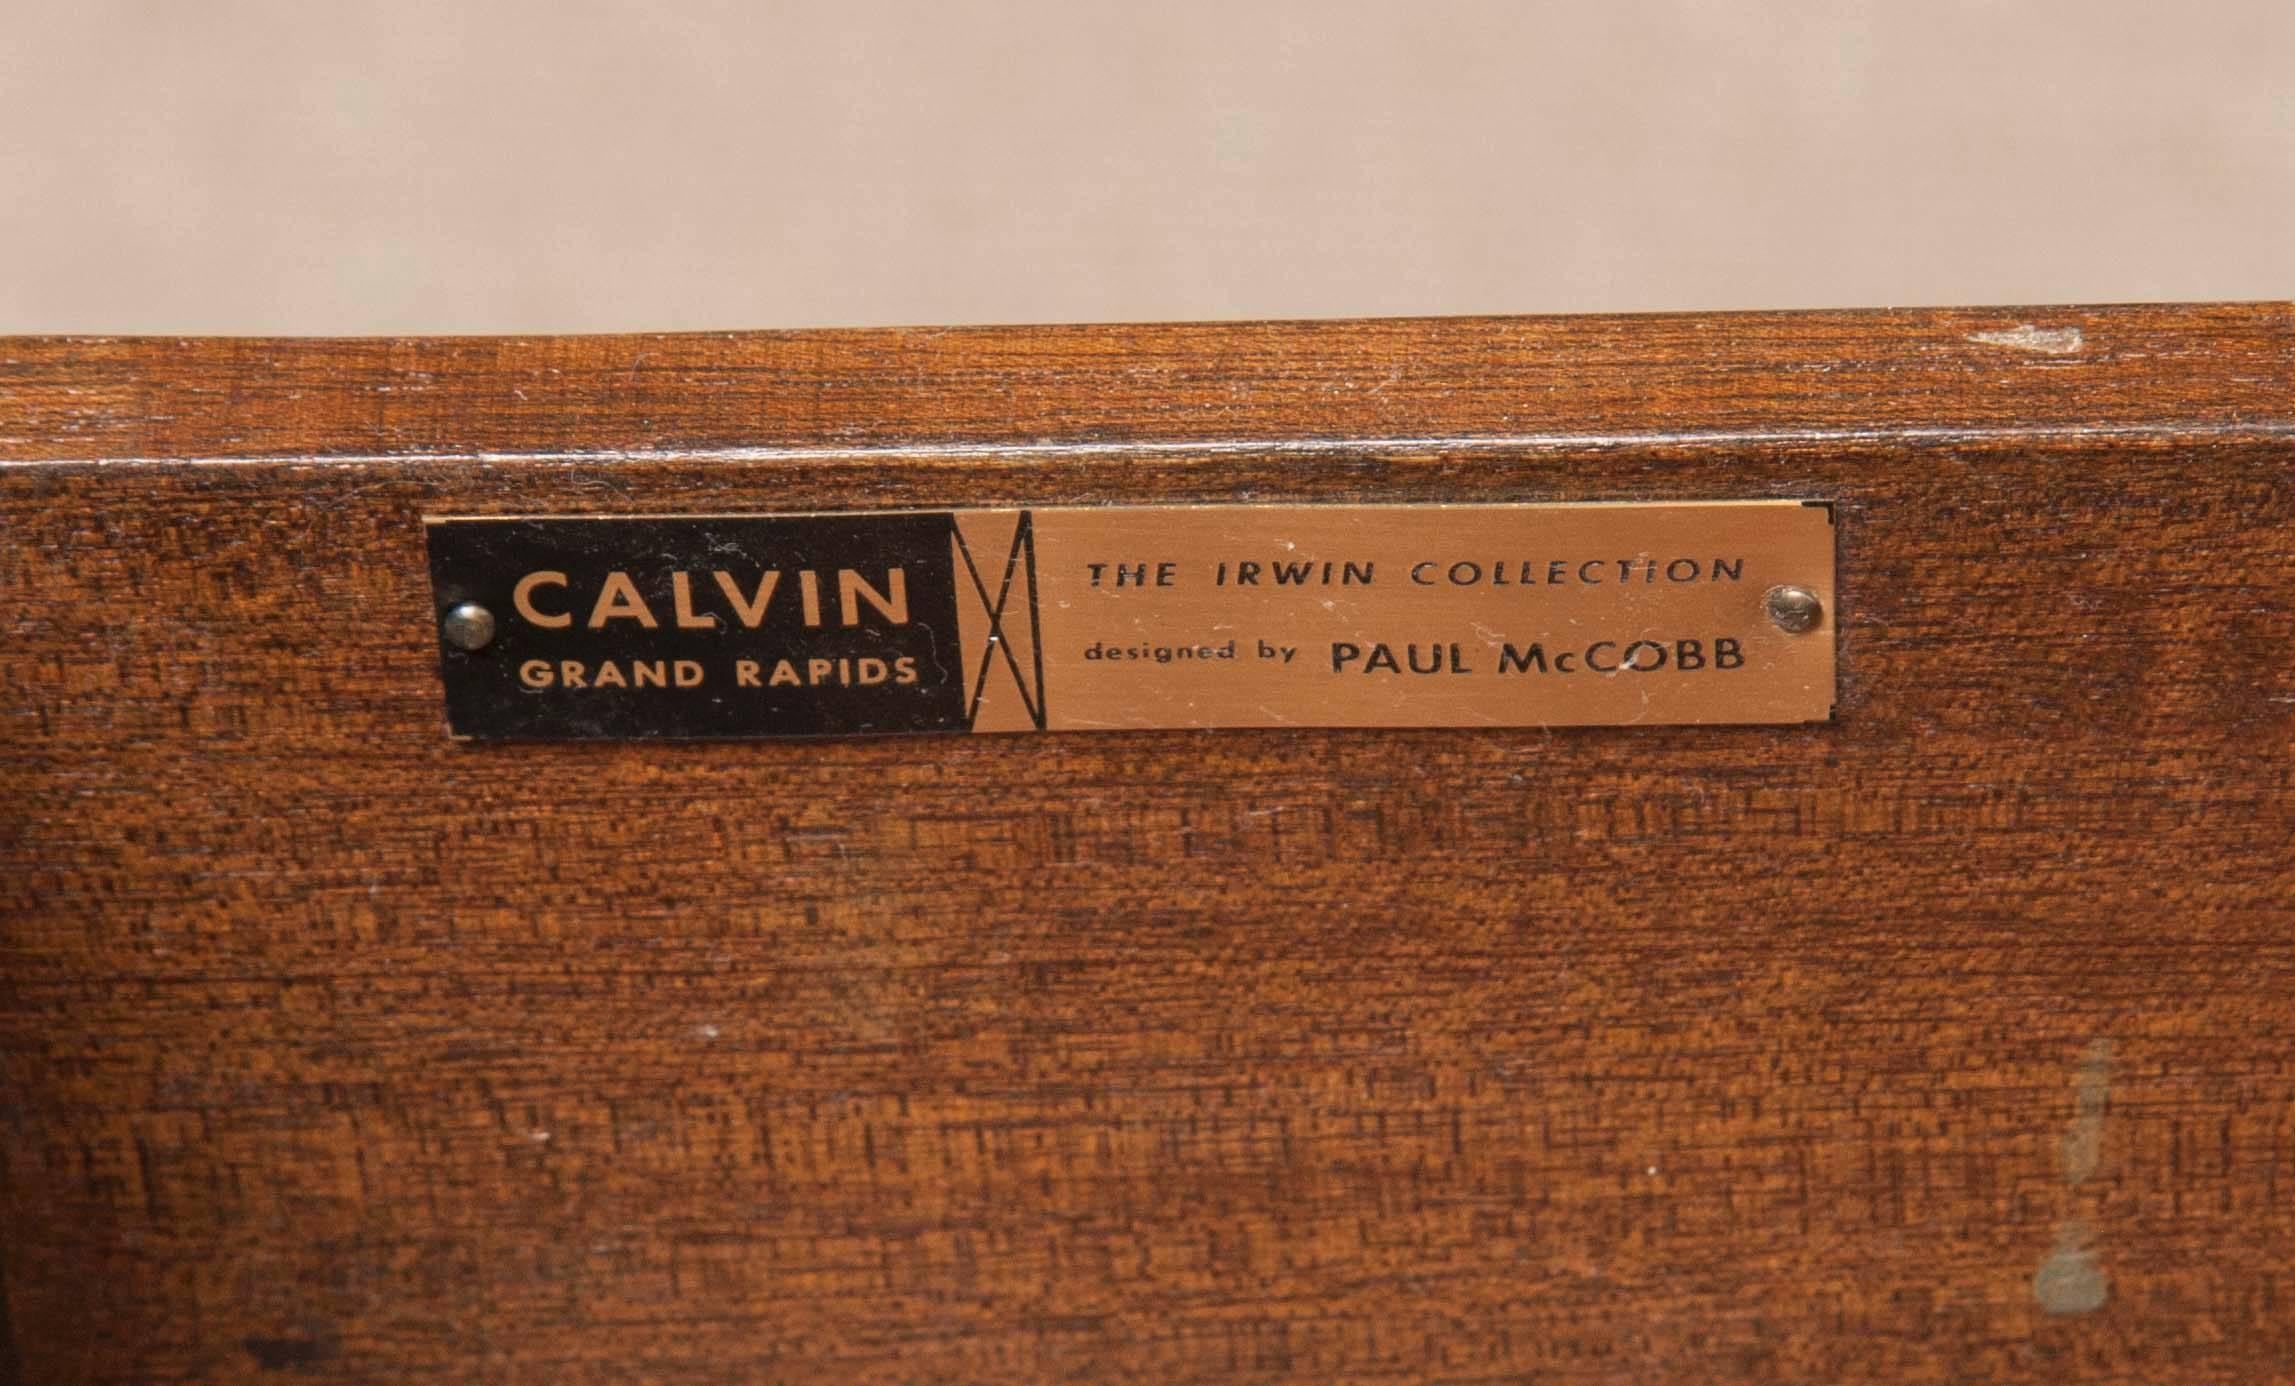 Offered for your consideration is a fully refinished credenza by famed American designer Paul McCobb for the Calvin Group. The credenza, part of the Irwin Collection, features a mahogany casing and brass trim. Six panels open to expose interior